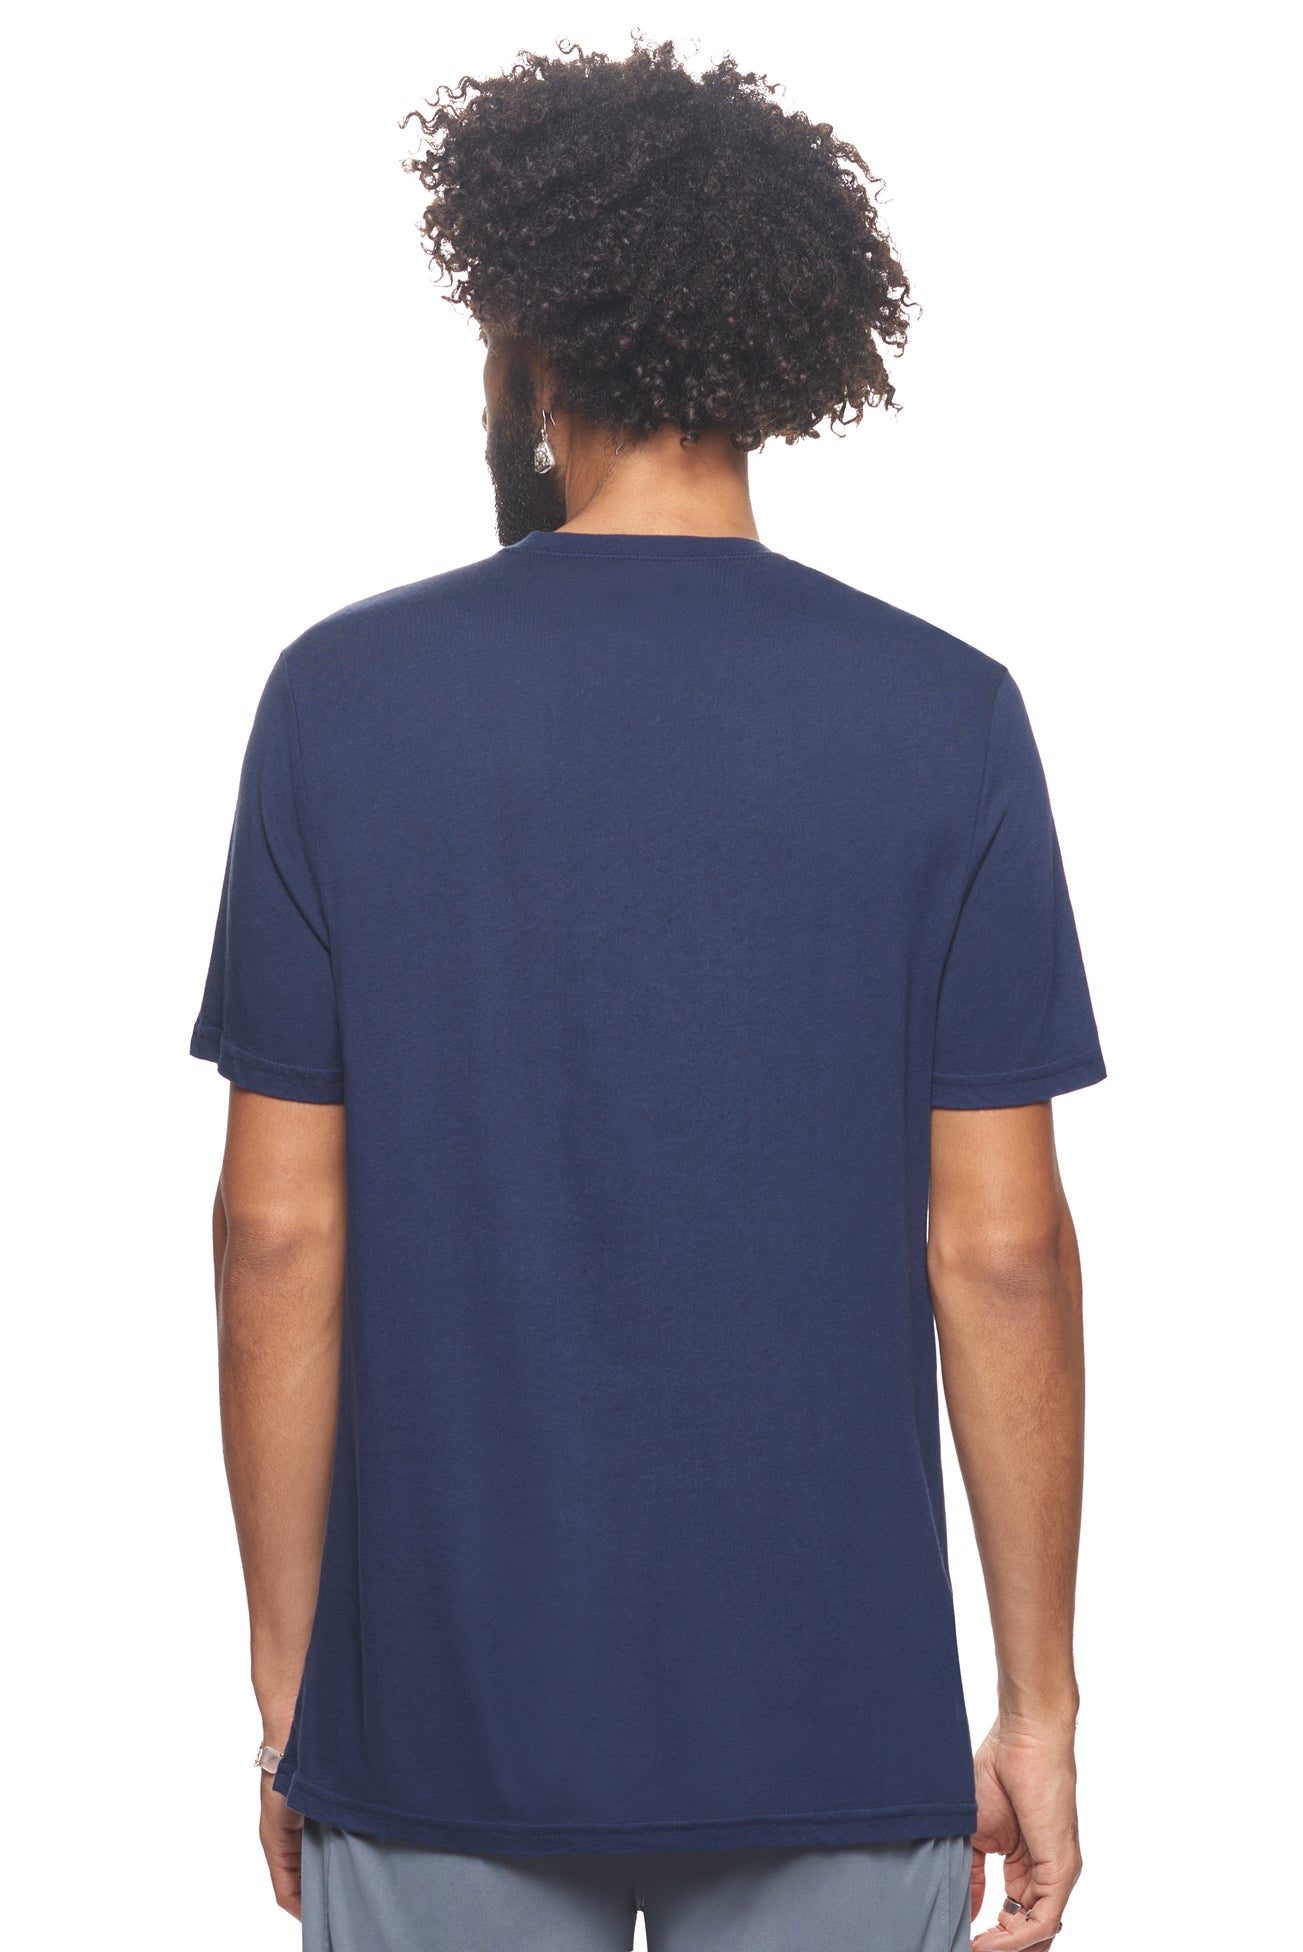 Expert Brand Wholesale Sustainable Eco-Friendly Apparel Micromodal Cotton Men's Crewneck T-Shirt Made in USA navy 4#navy